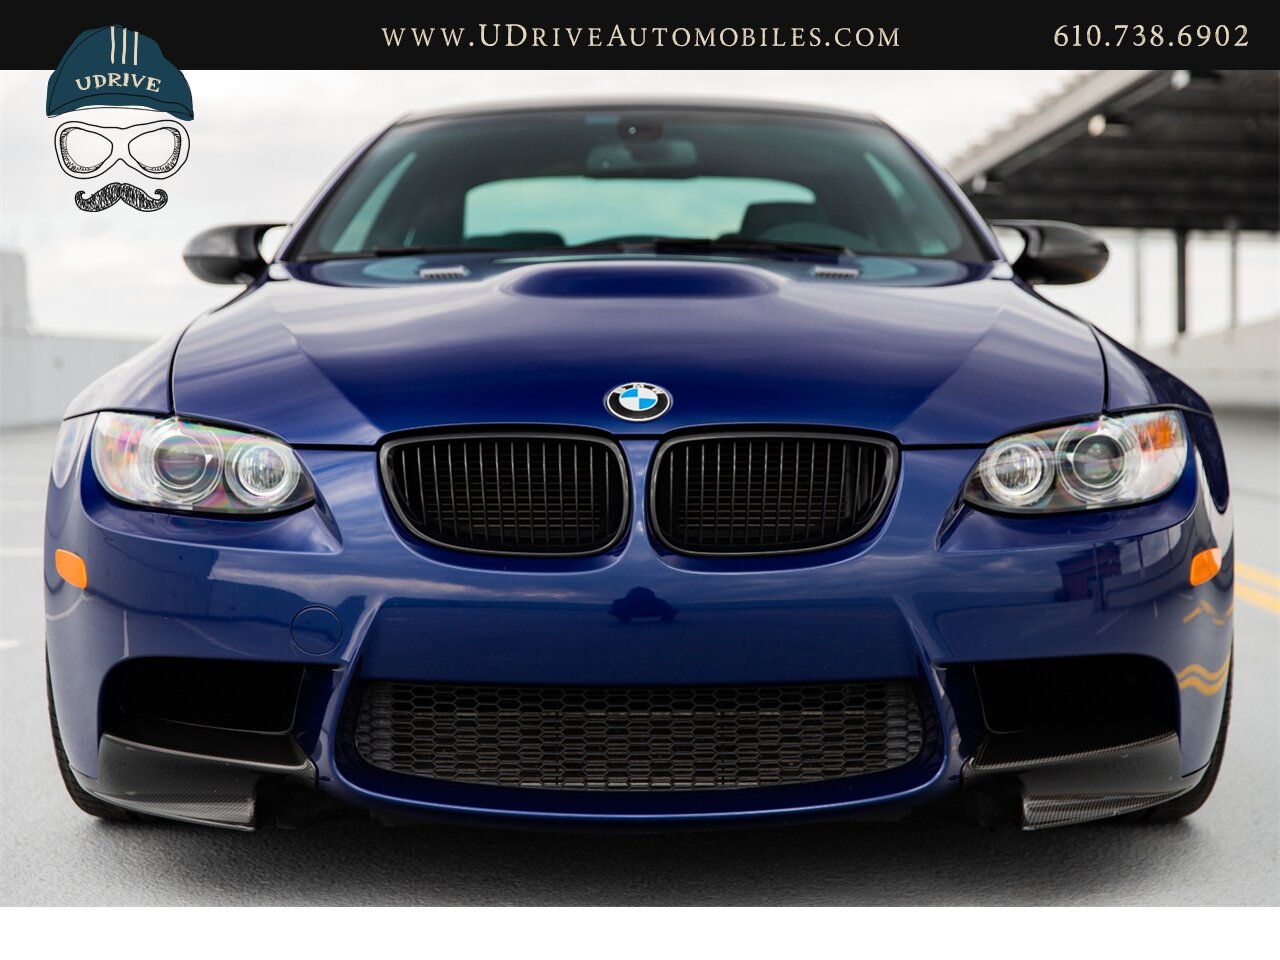 2011 BMW M3 E92 6 Speed Manual Competition Pkg Interlagos Blue  16k Miles Nav PDC EDC Comf Acc - Photo 13 - West Chester, PA 19382